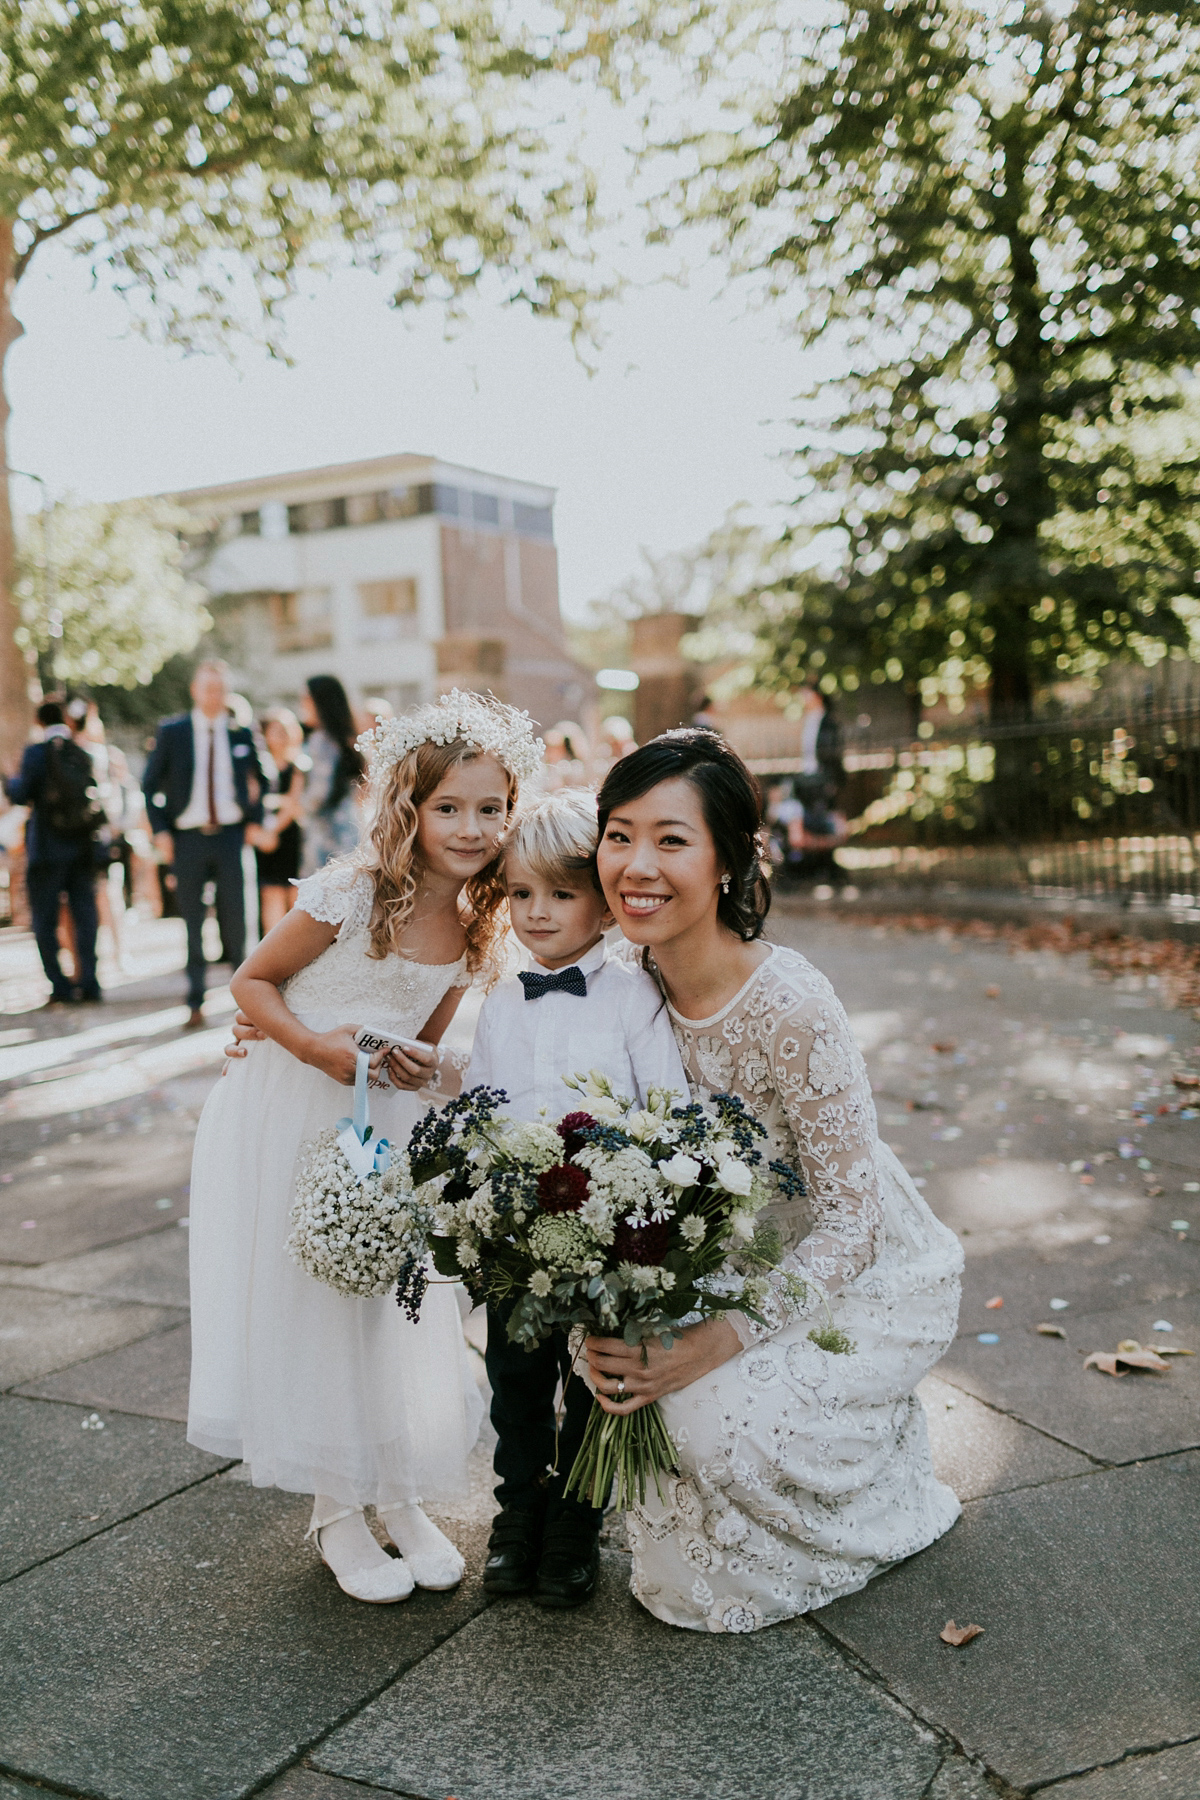 Bride Su wore a Needle & Thread wedding dress for her modern and elegant London wedding. She and her husband Nik met through online dating agency, Guardian Soulmates.